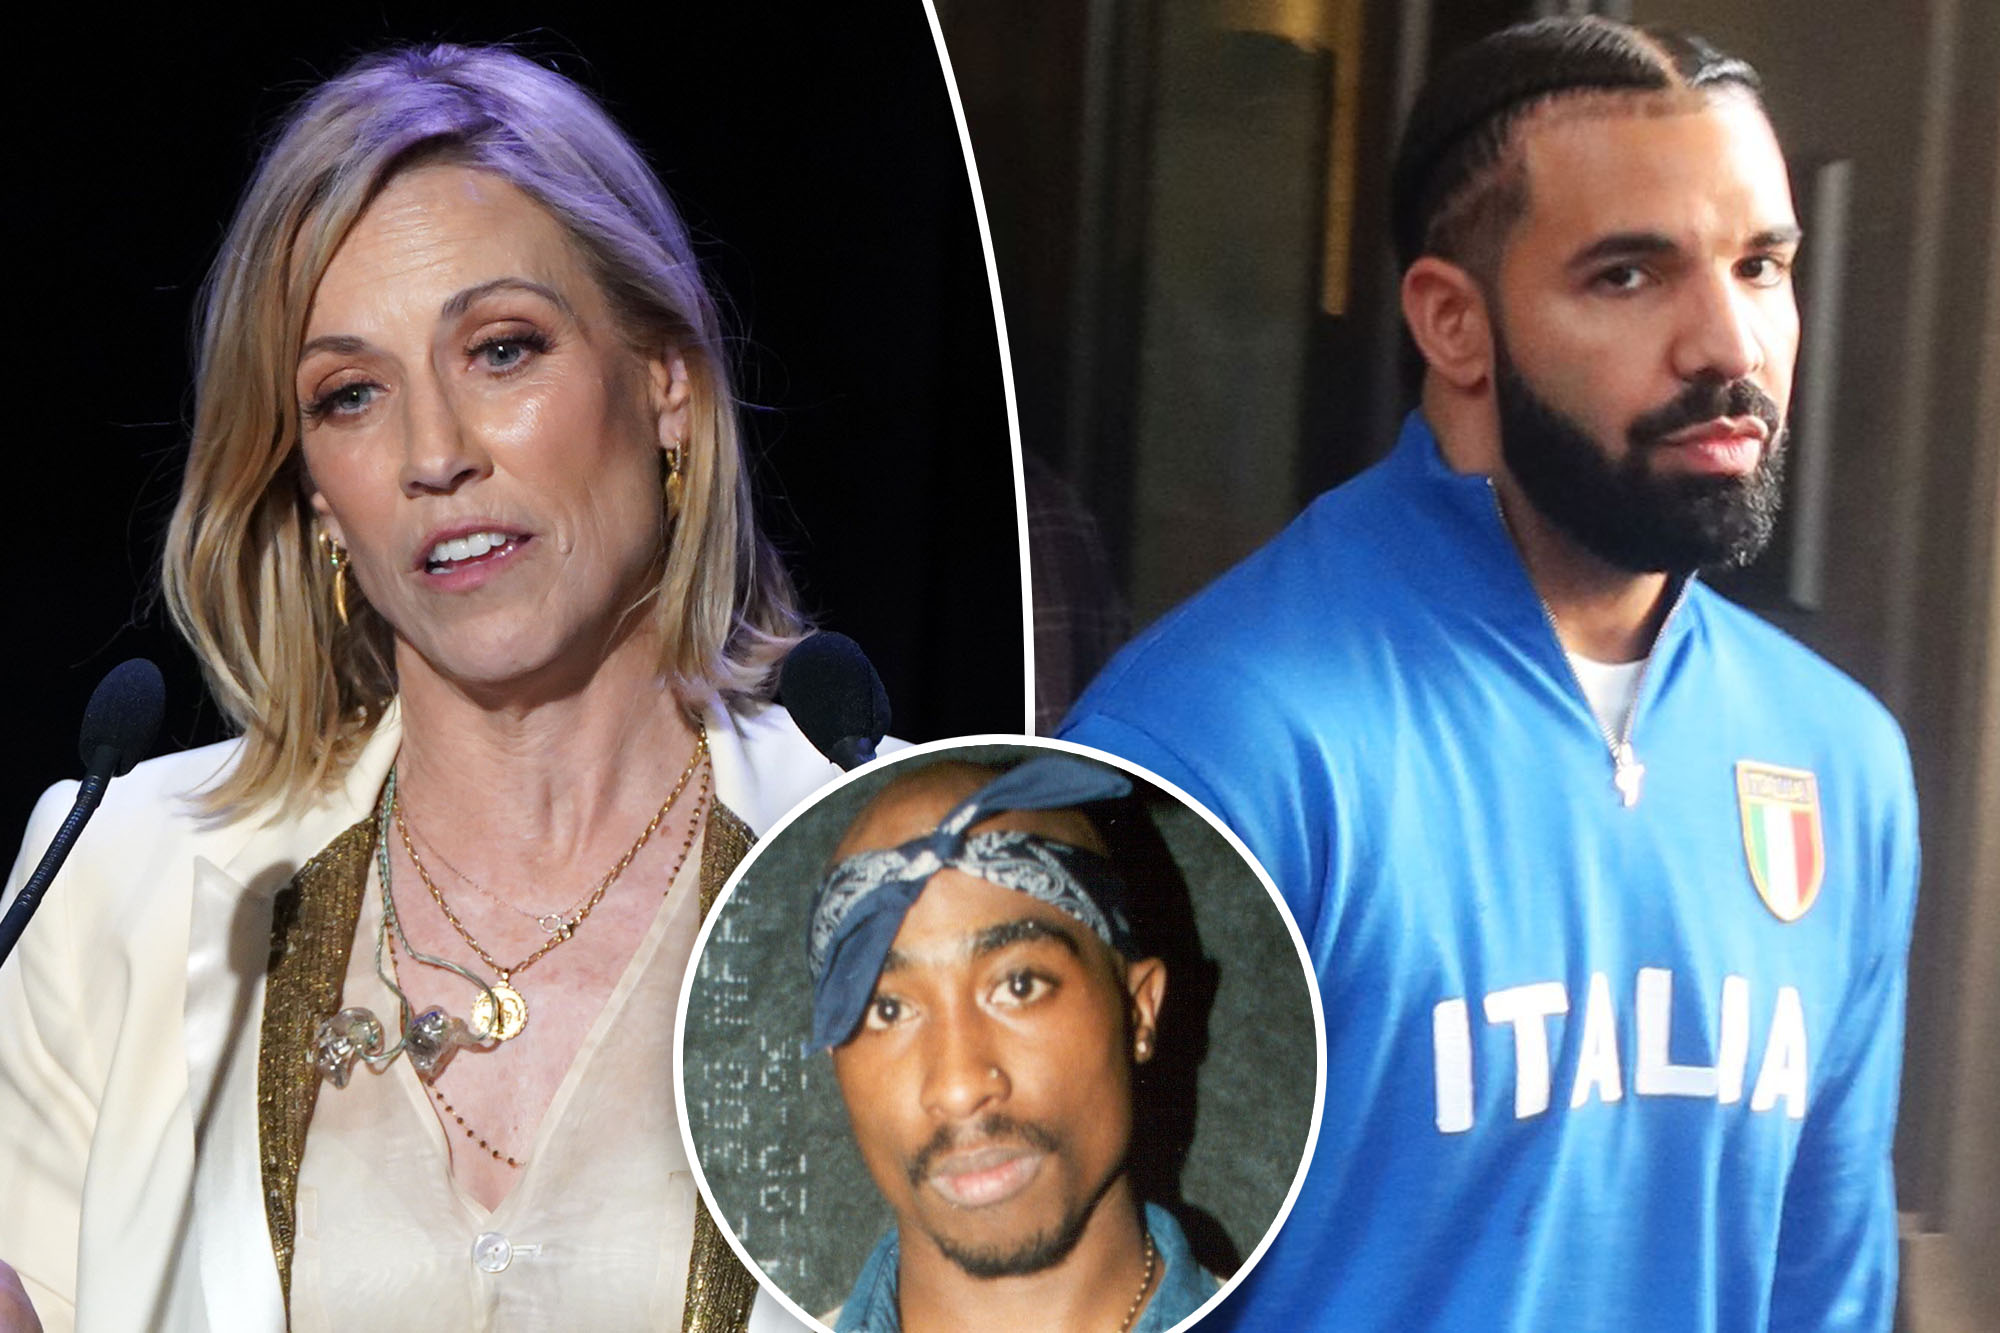 You cannot bring people back from the dead," says Sheryl Crow as she blasts Drake for using an AI-generated Tupac in Kendrick Lamar diss.